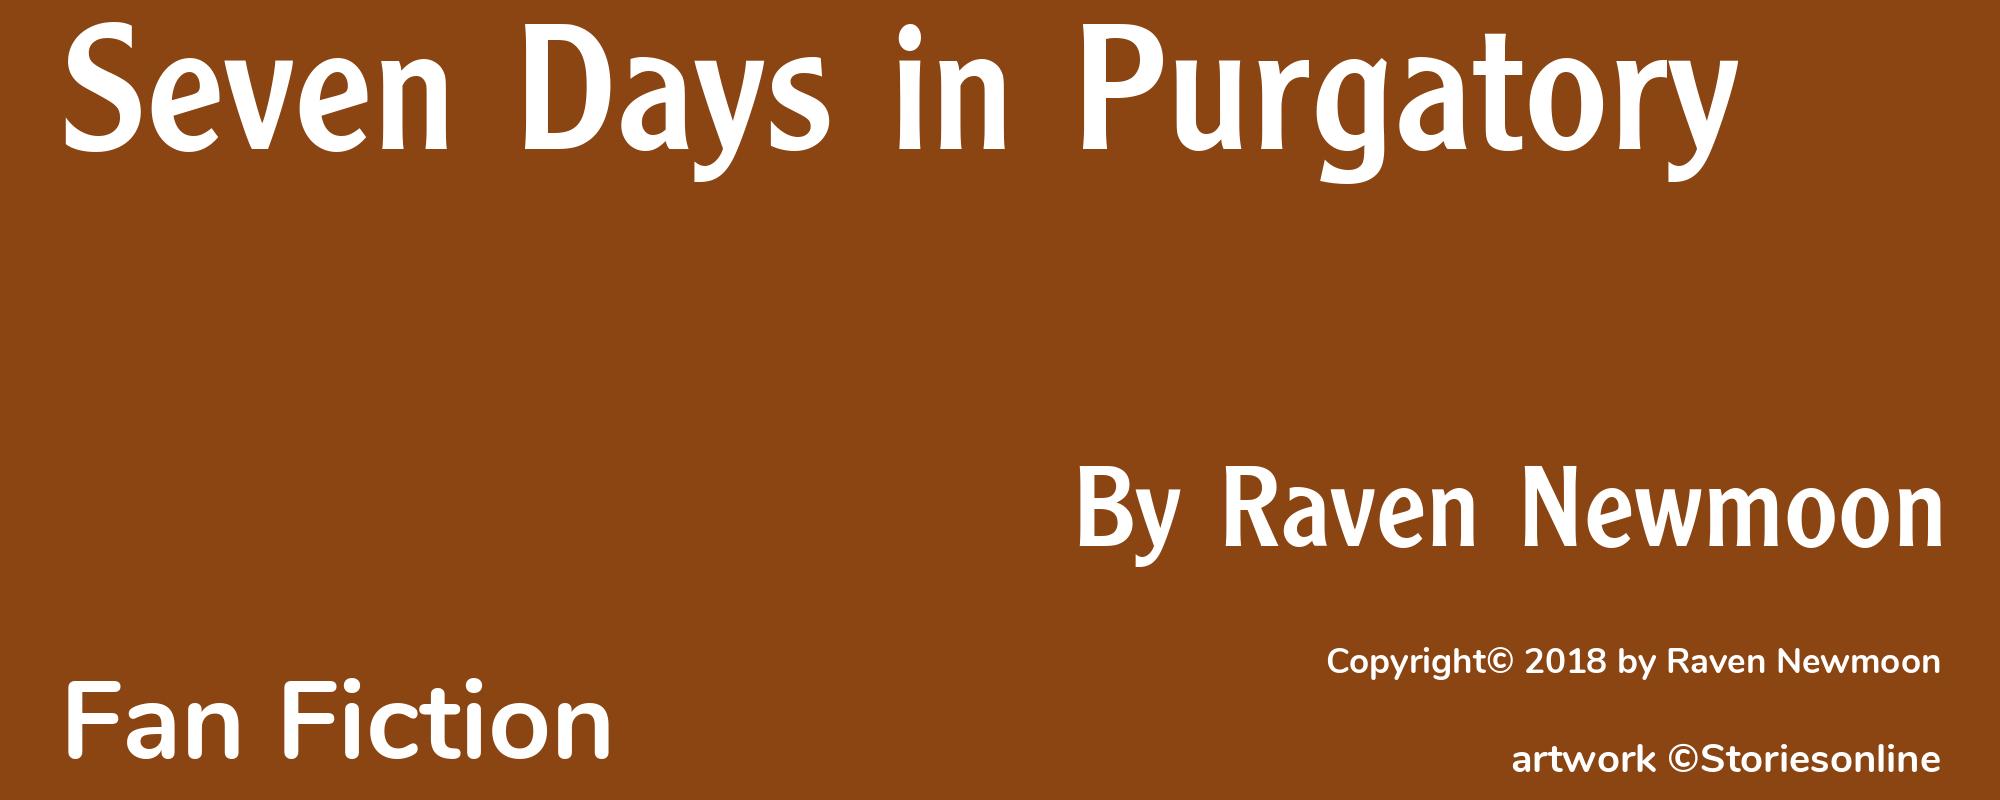 Seven Days in Purgatory - Cover